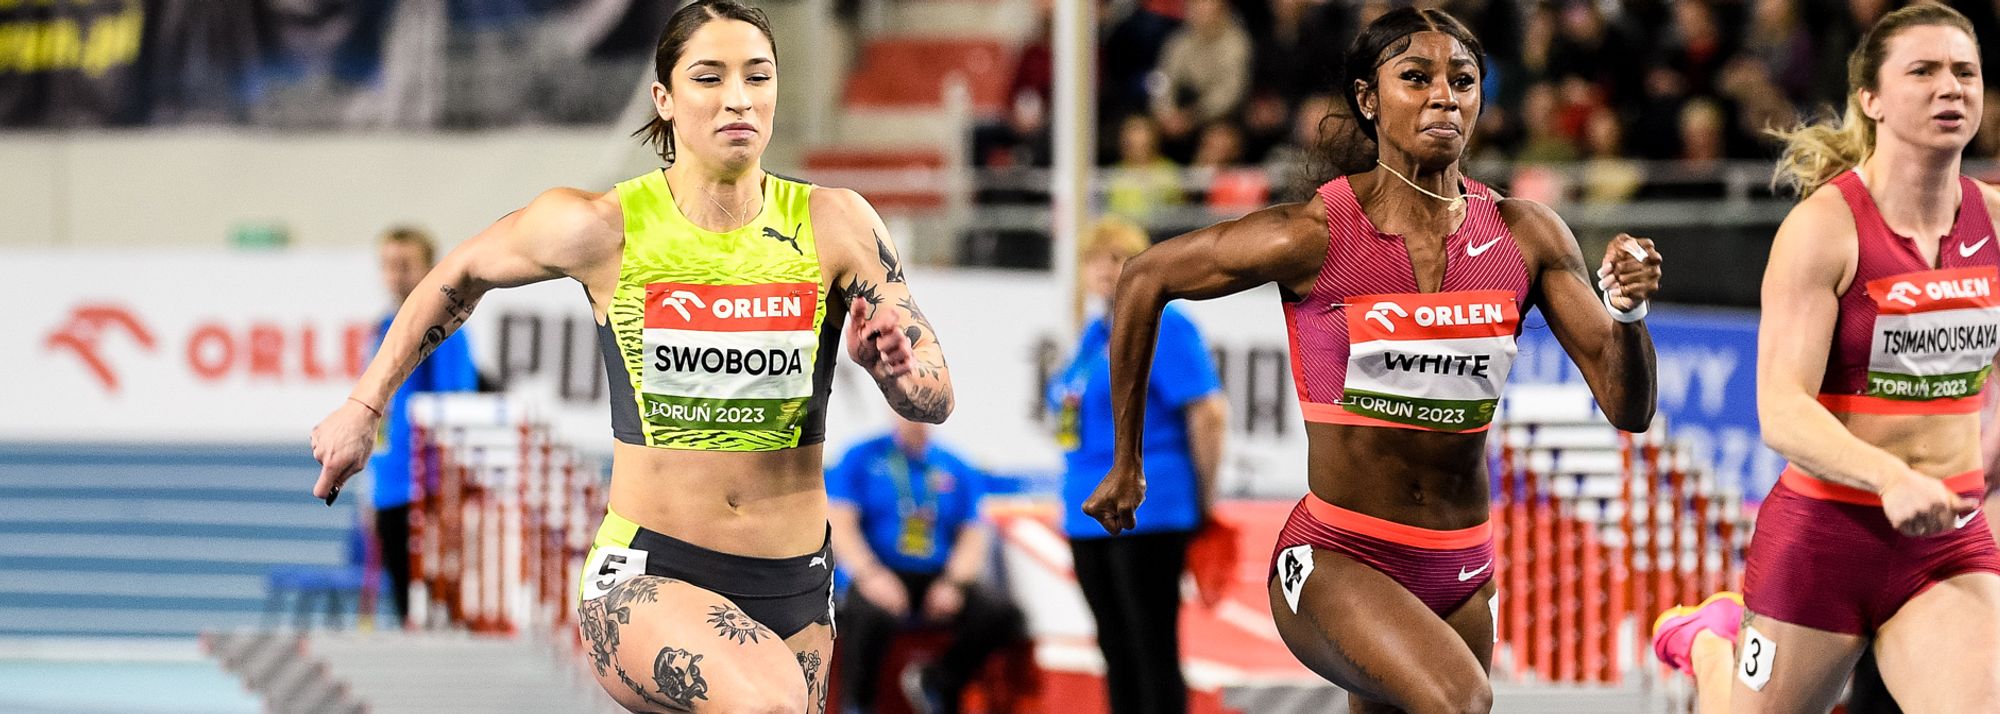 The latest World Indoor Tour Gold meeting at Arena Torun promises to be a raucous occasion